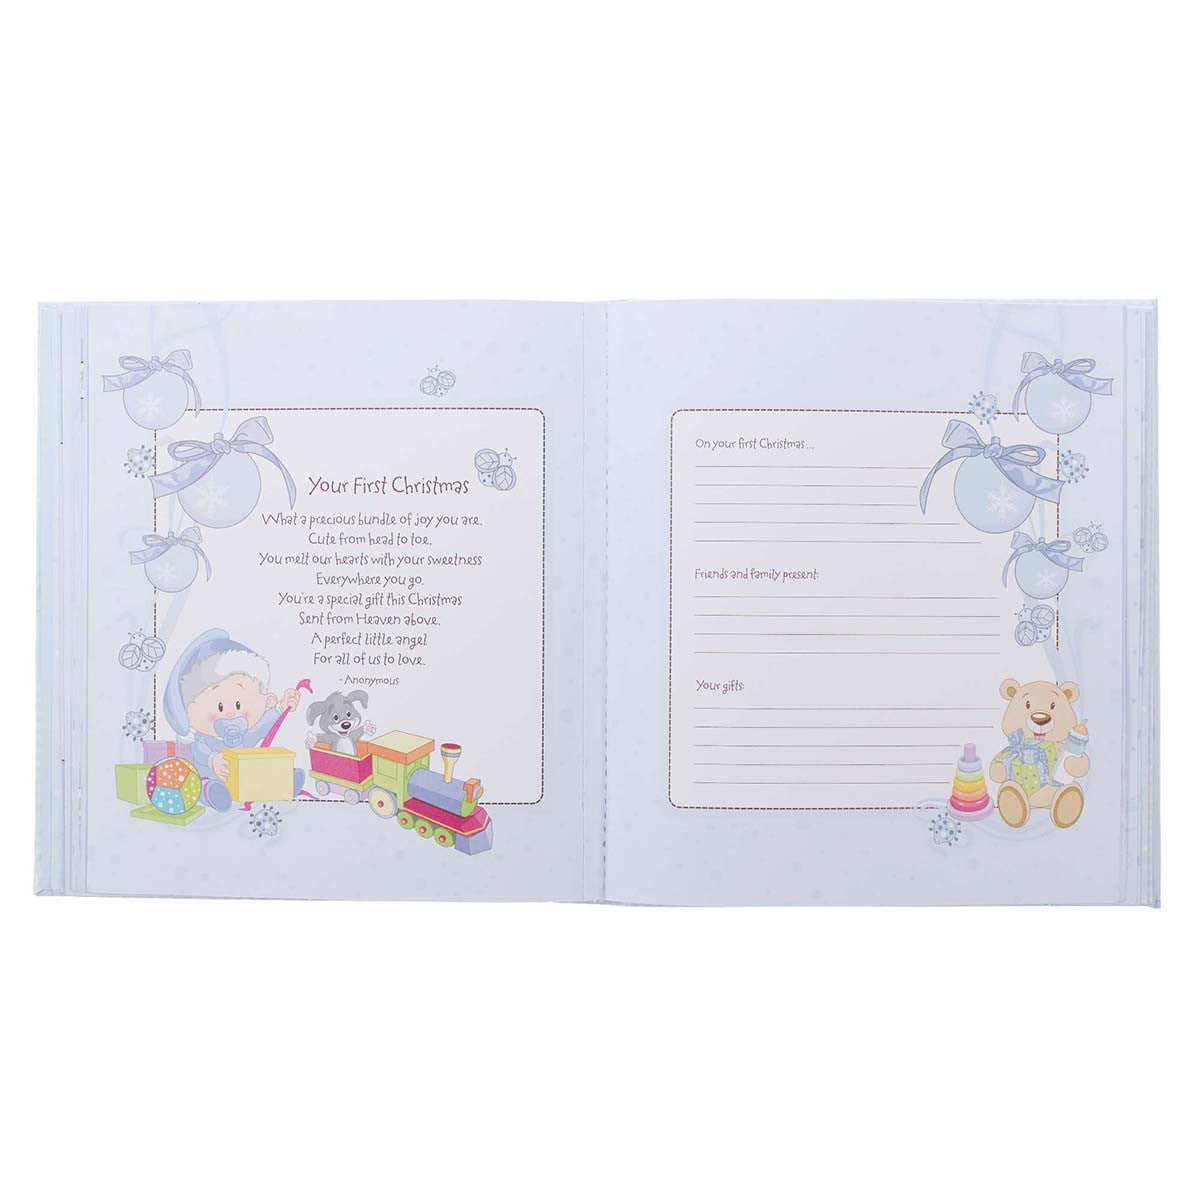 Our Baby Boy Memory Book - The Christian Gift Company